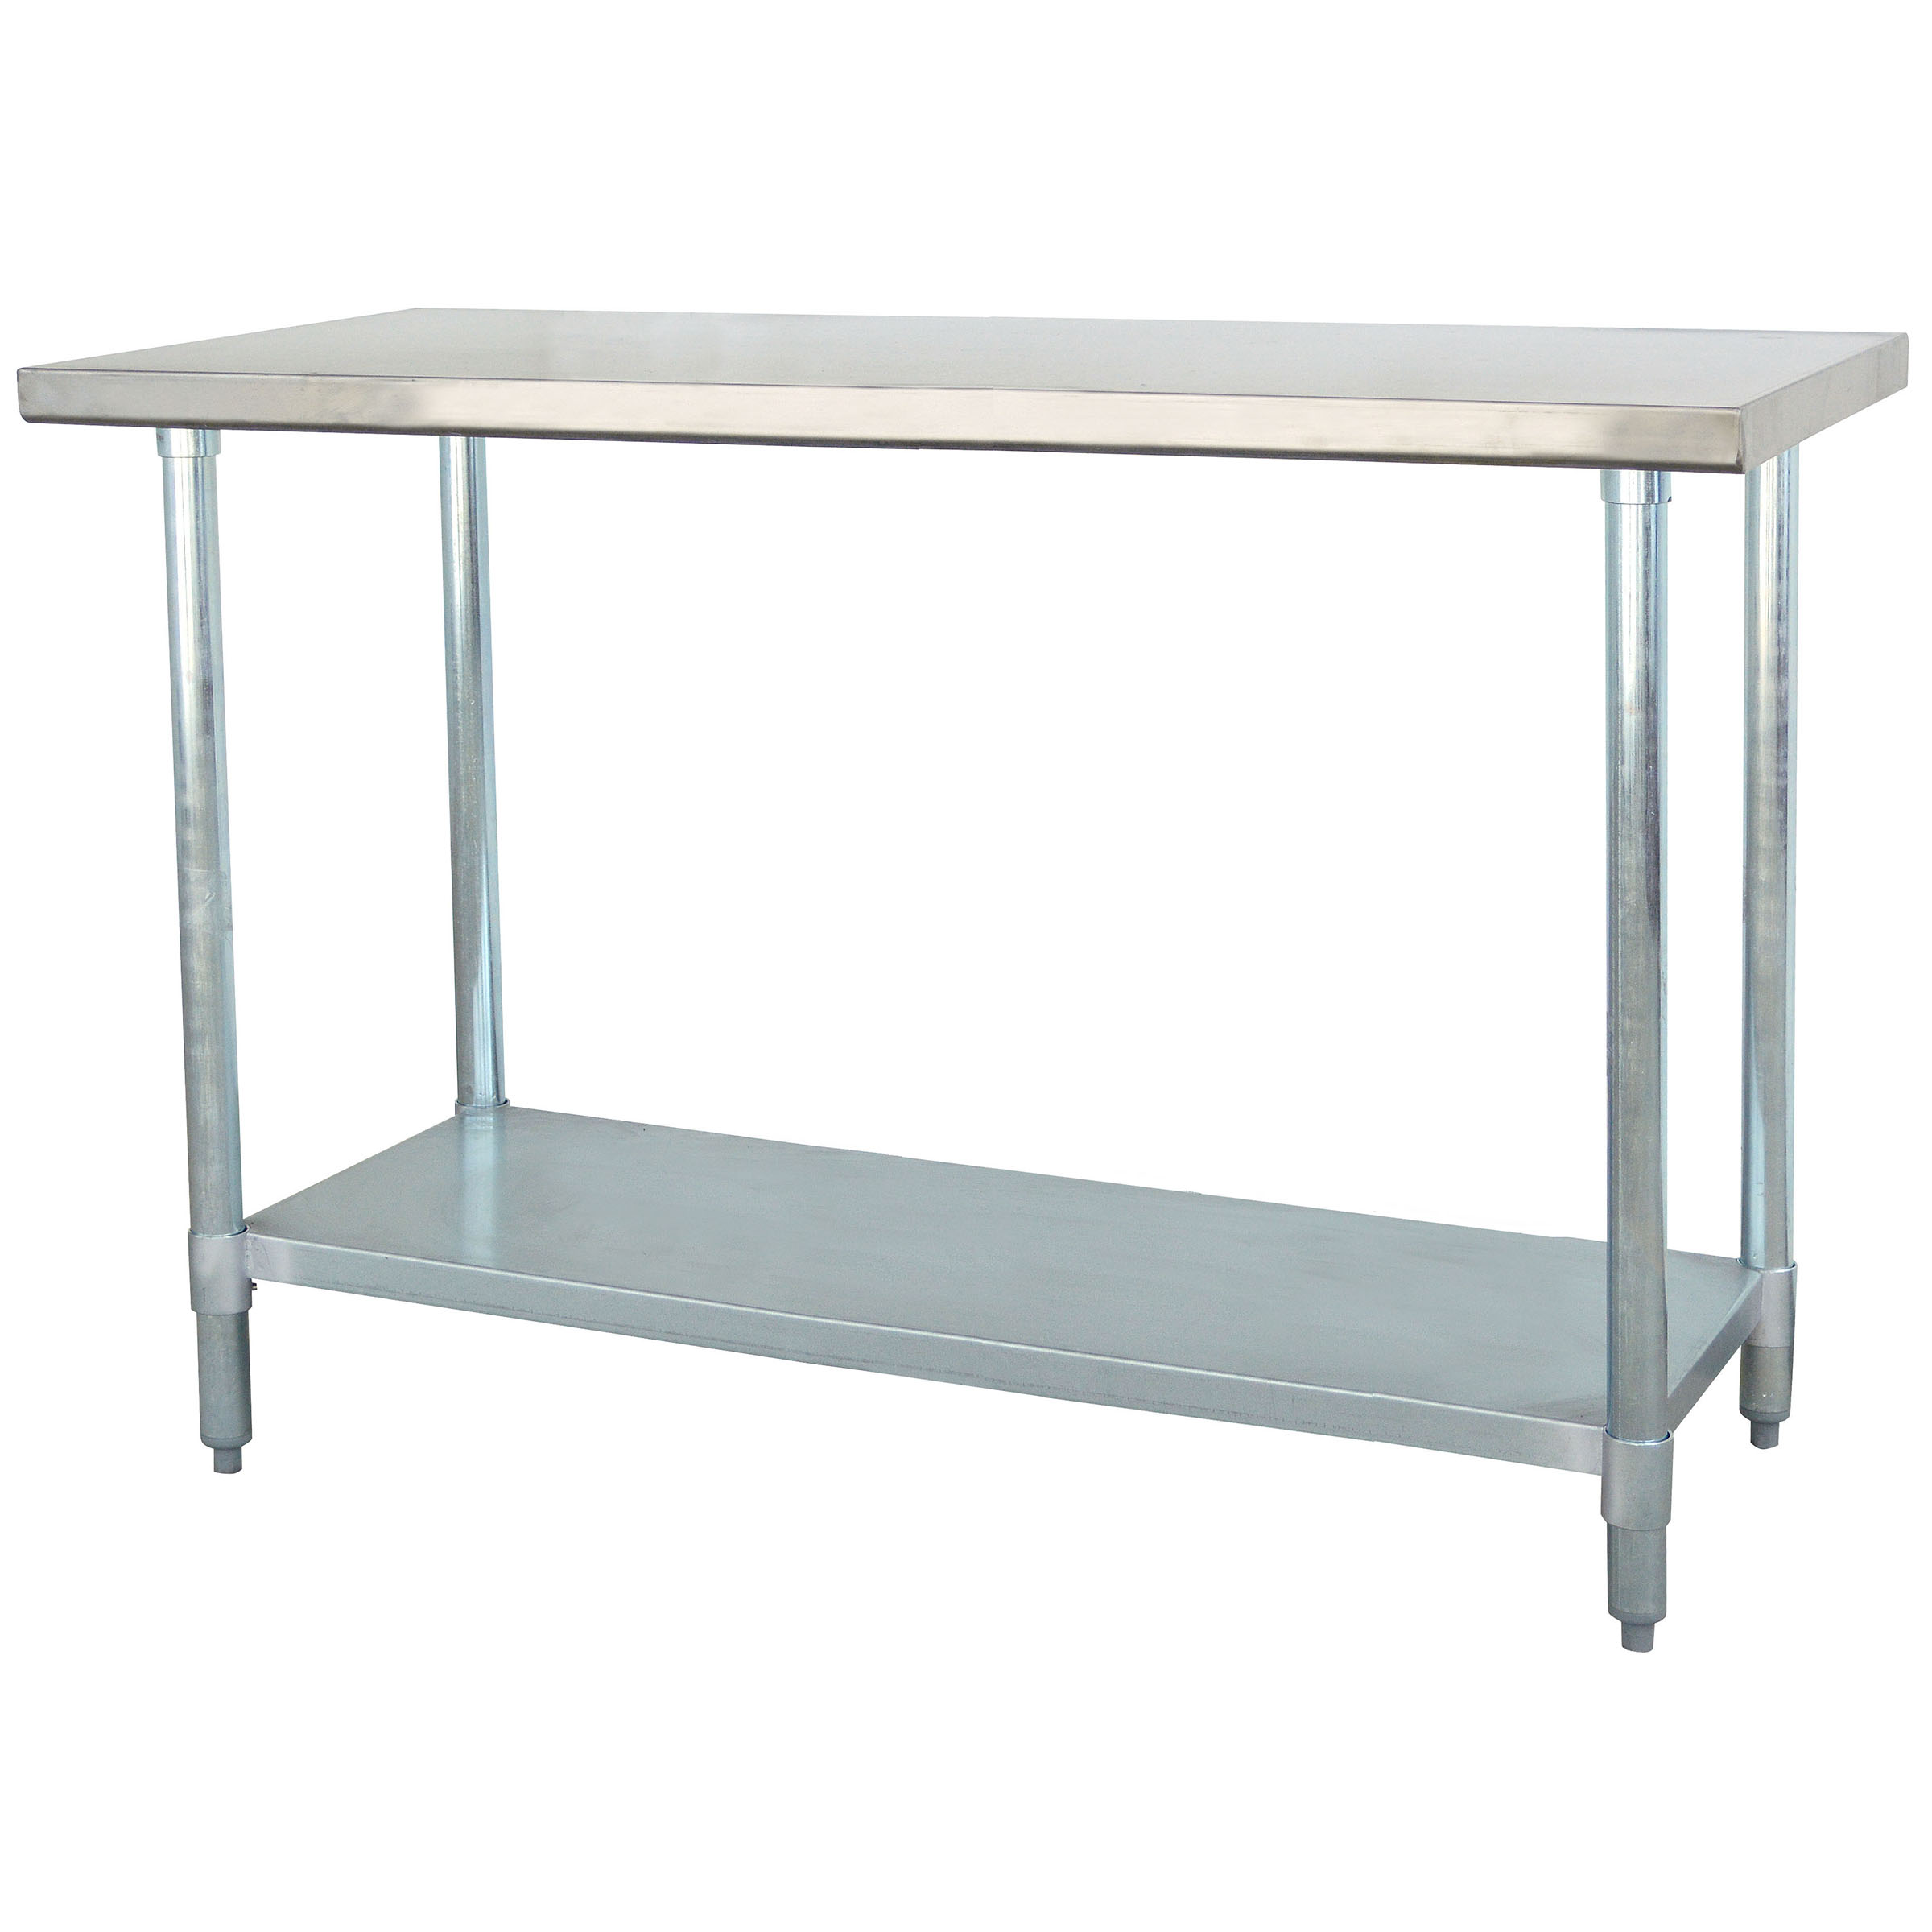 Stainless Steel Table 24"x72"